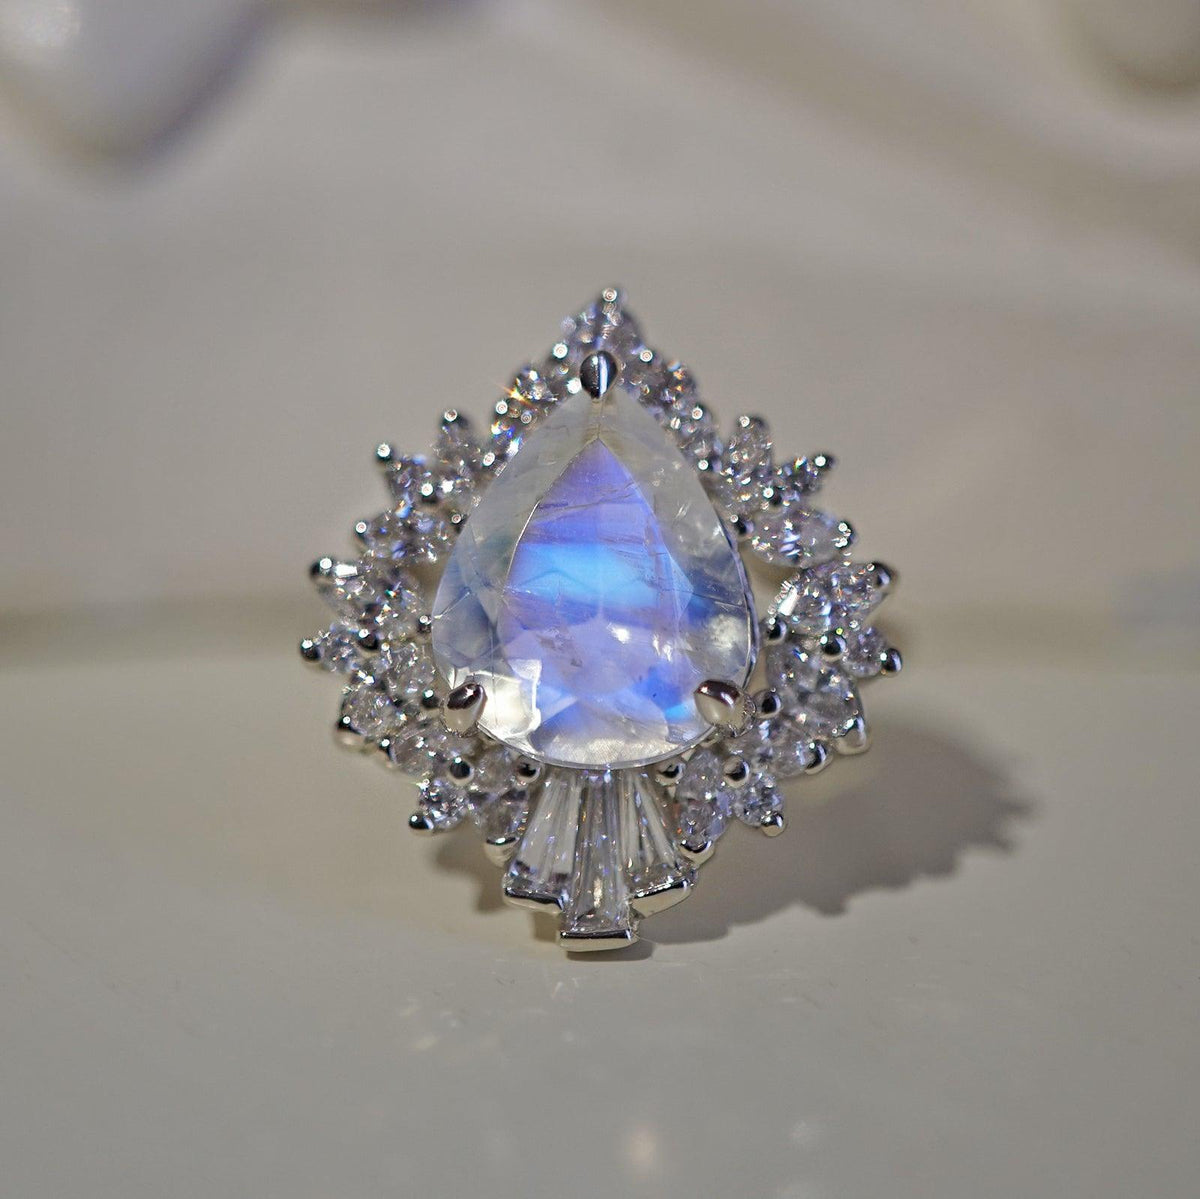 Hall Of Mirrors Moonstone Diamond Ring in 14K and 18K Gold - Tippy Taste Jewelry